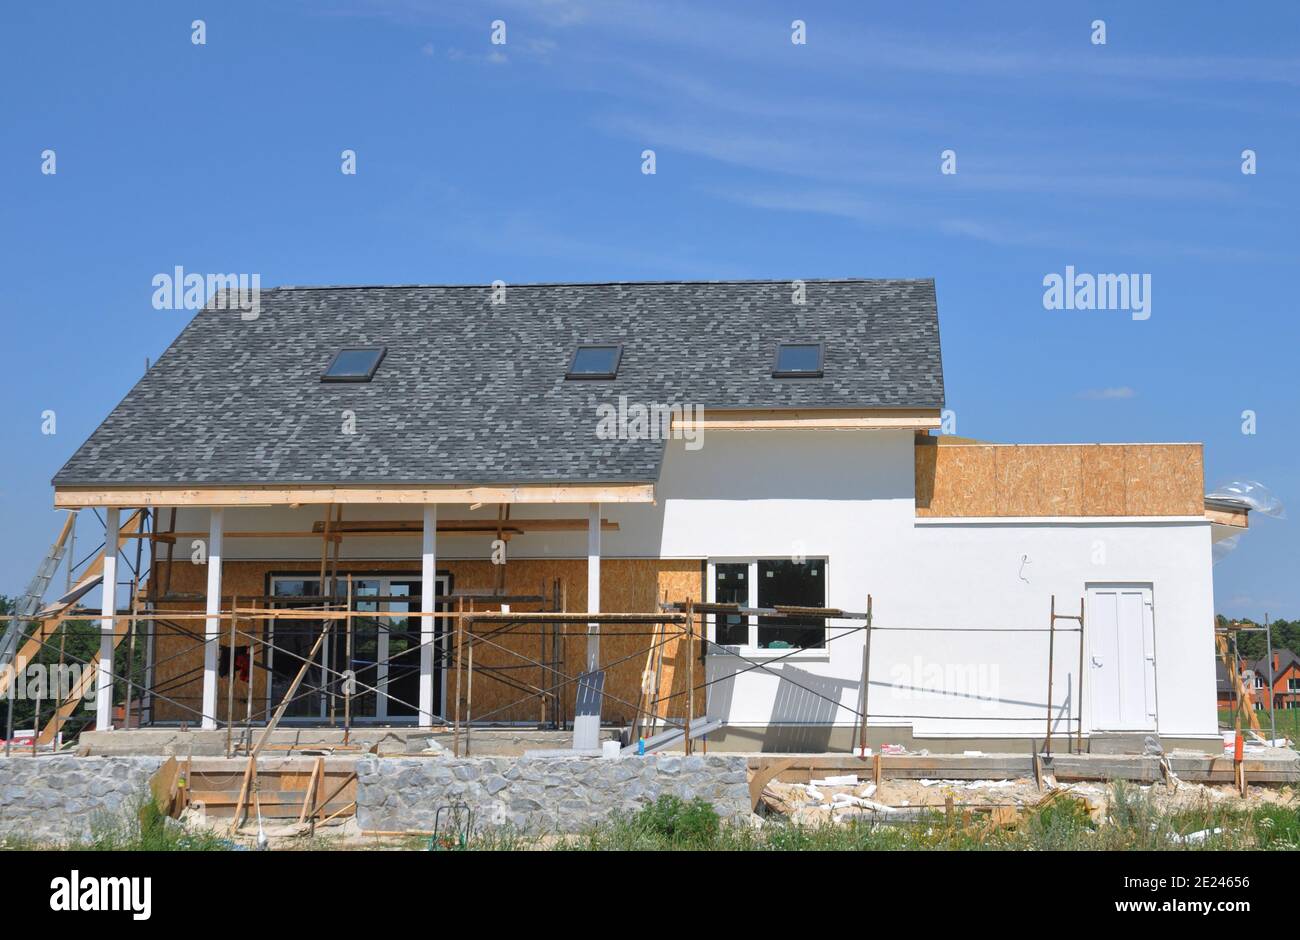 The house facade and patio renovation. Painting, rendering and renovating the exterior walls of a house with an asphalt shingled roof and skylights. Stock Photo